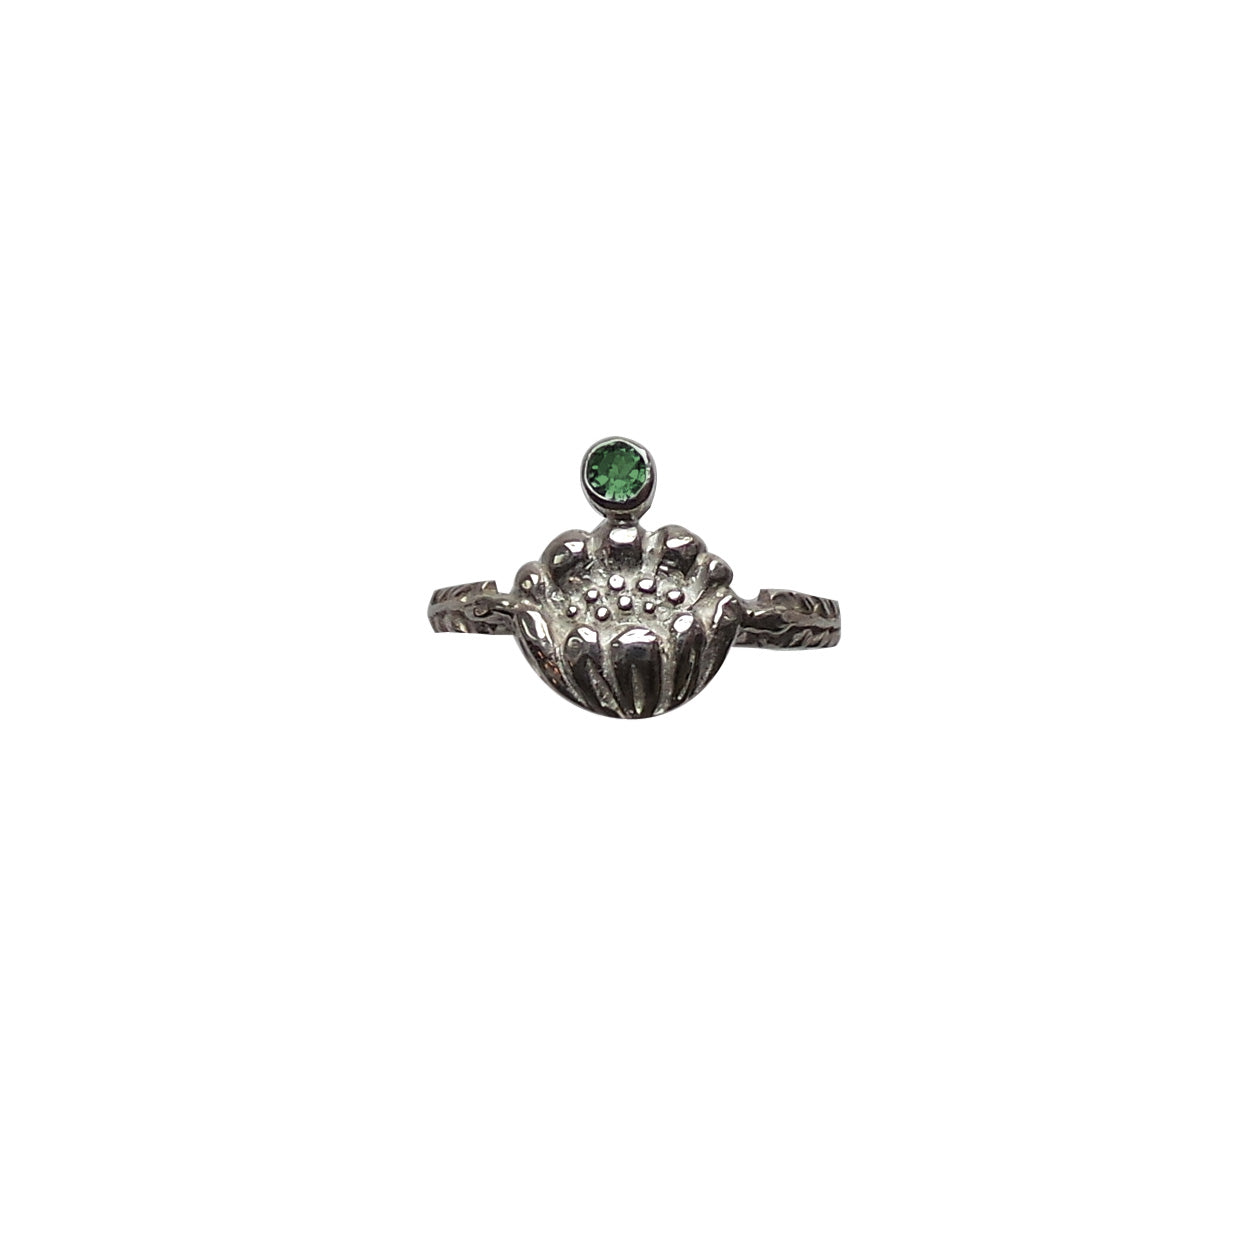 Hunt Of Hounds Adonis Flower Ring in Silver. A flower mounted on a botanical leaf band with gemstone.